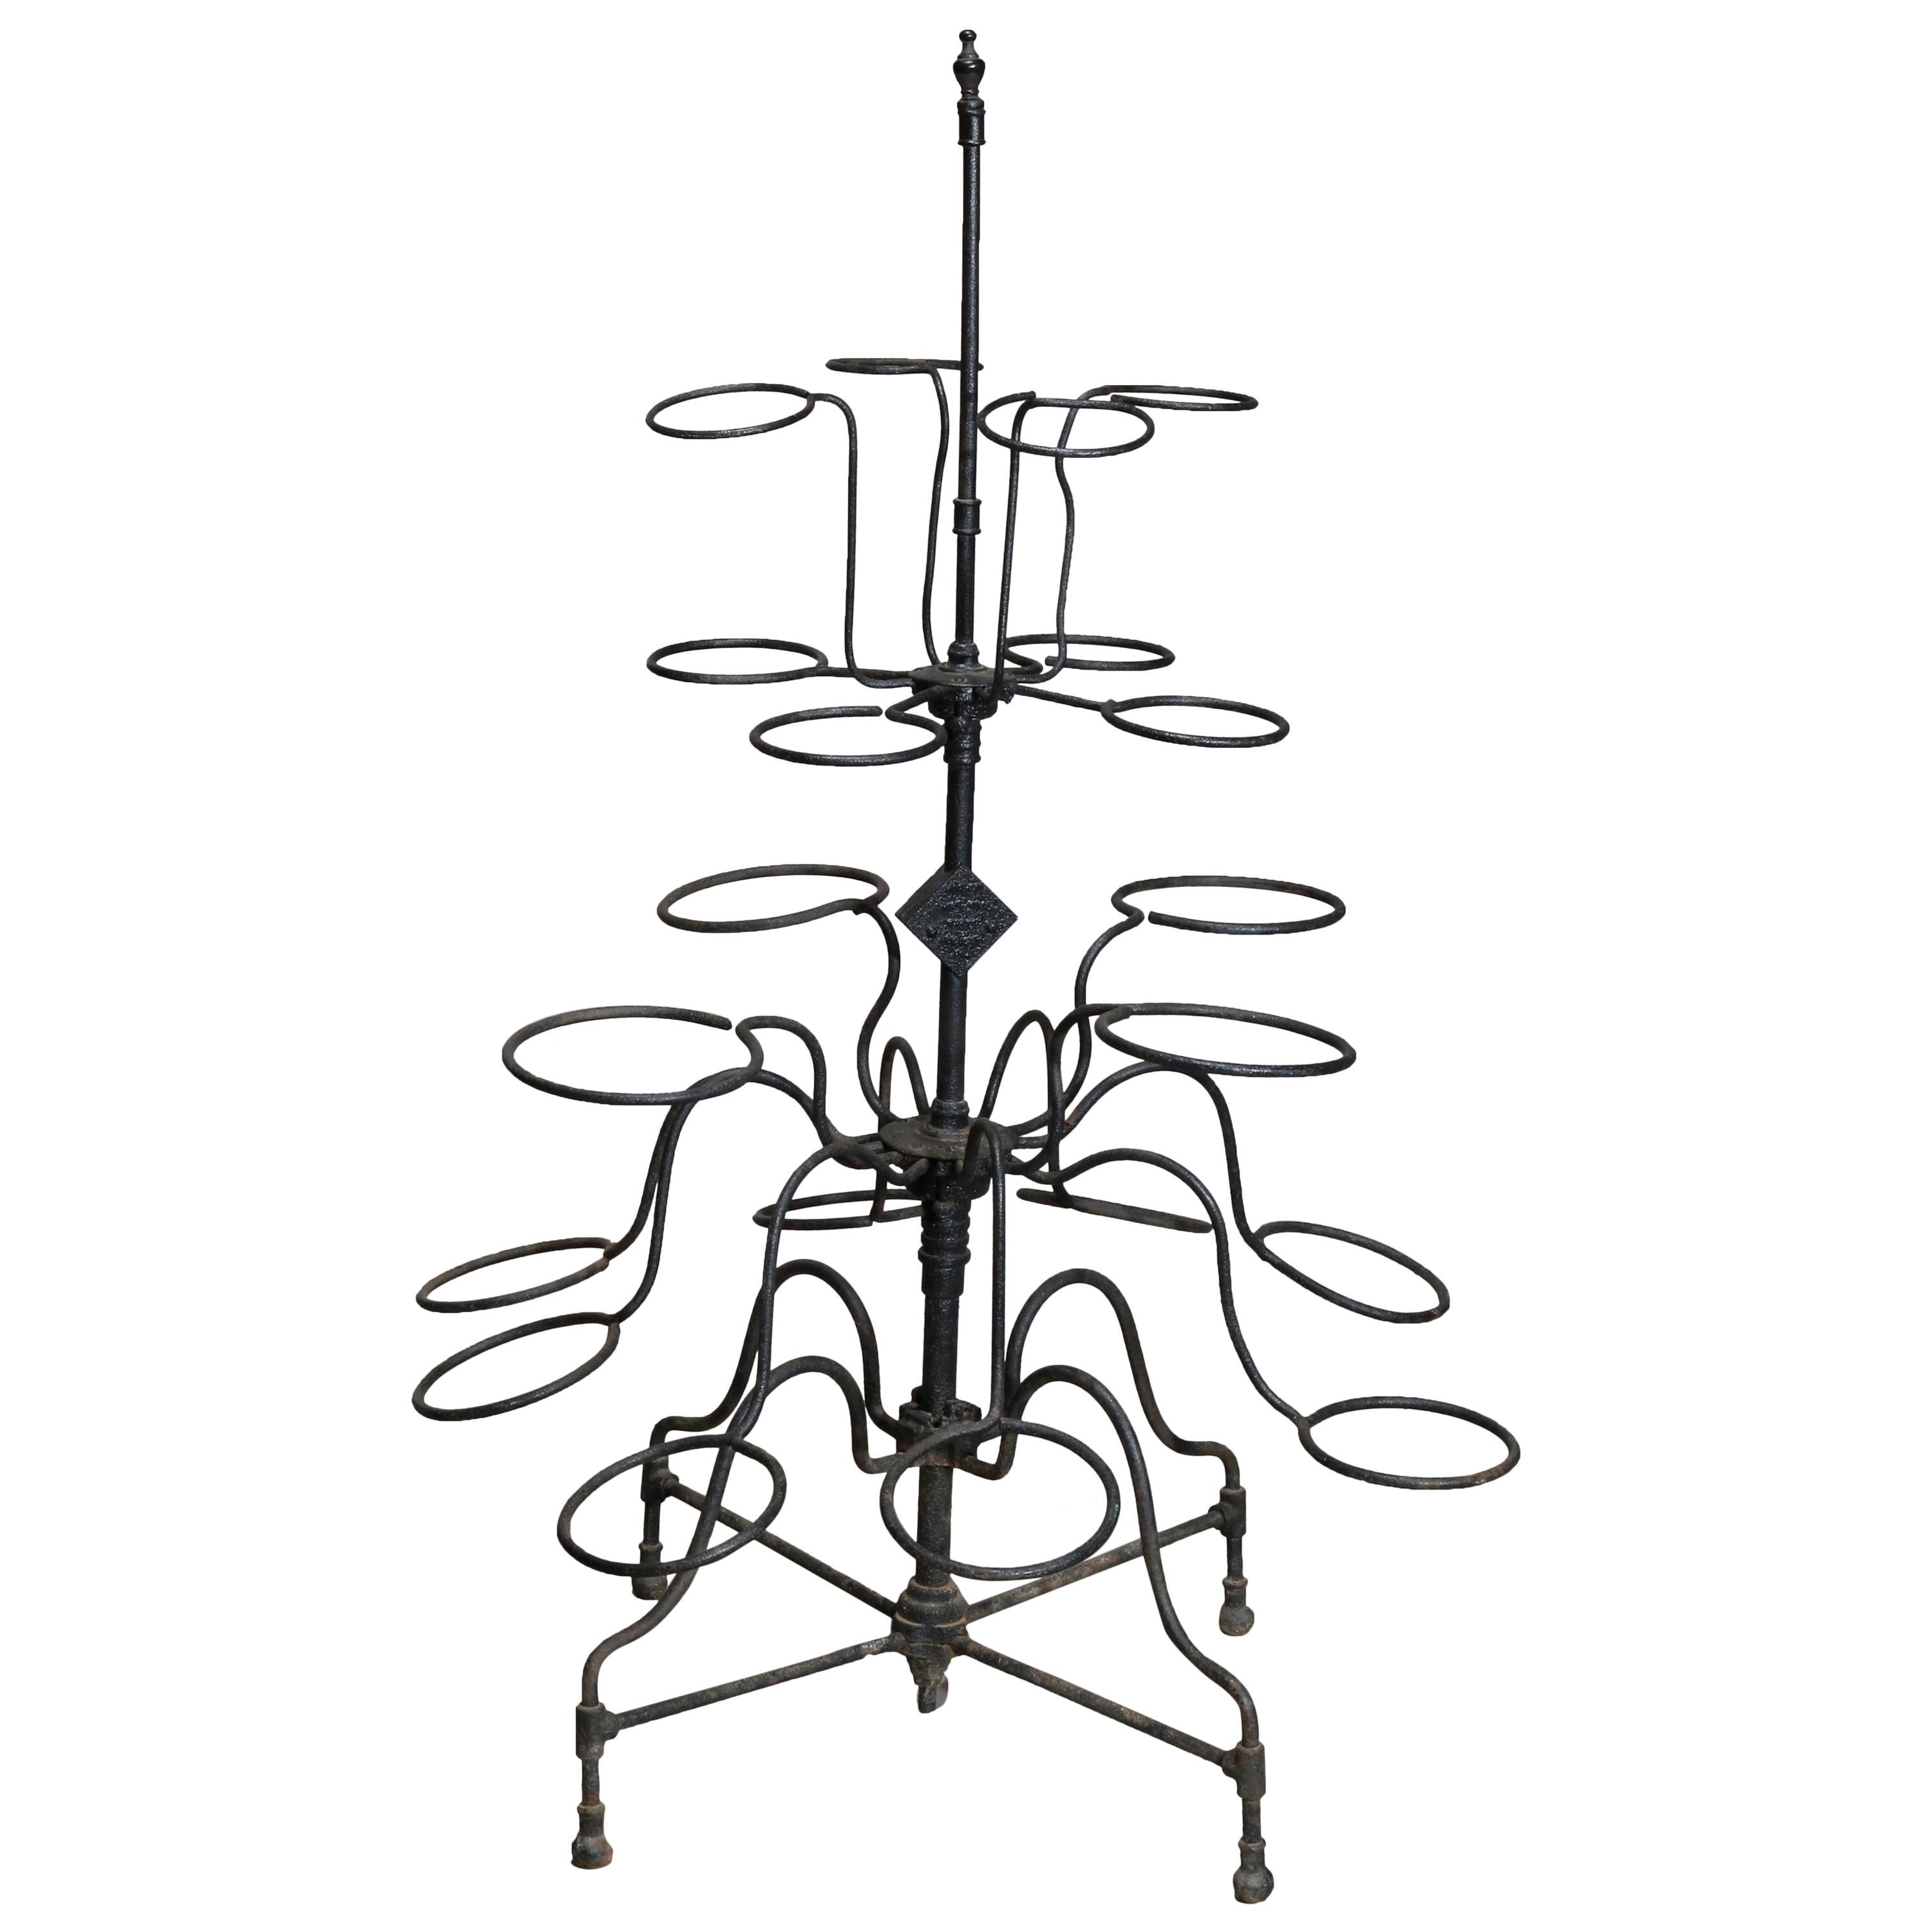 Antique Tiered Wrought Iron Patio Garden Plant Display Stand, circa 1890